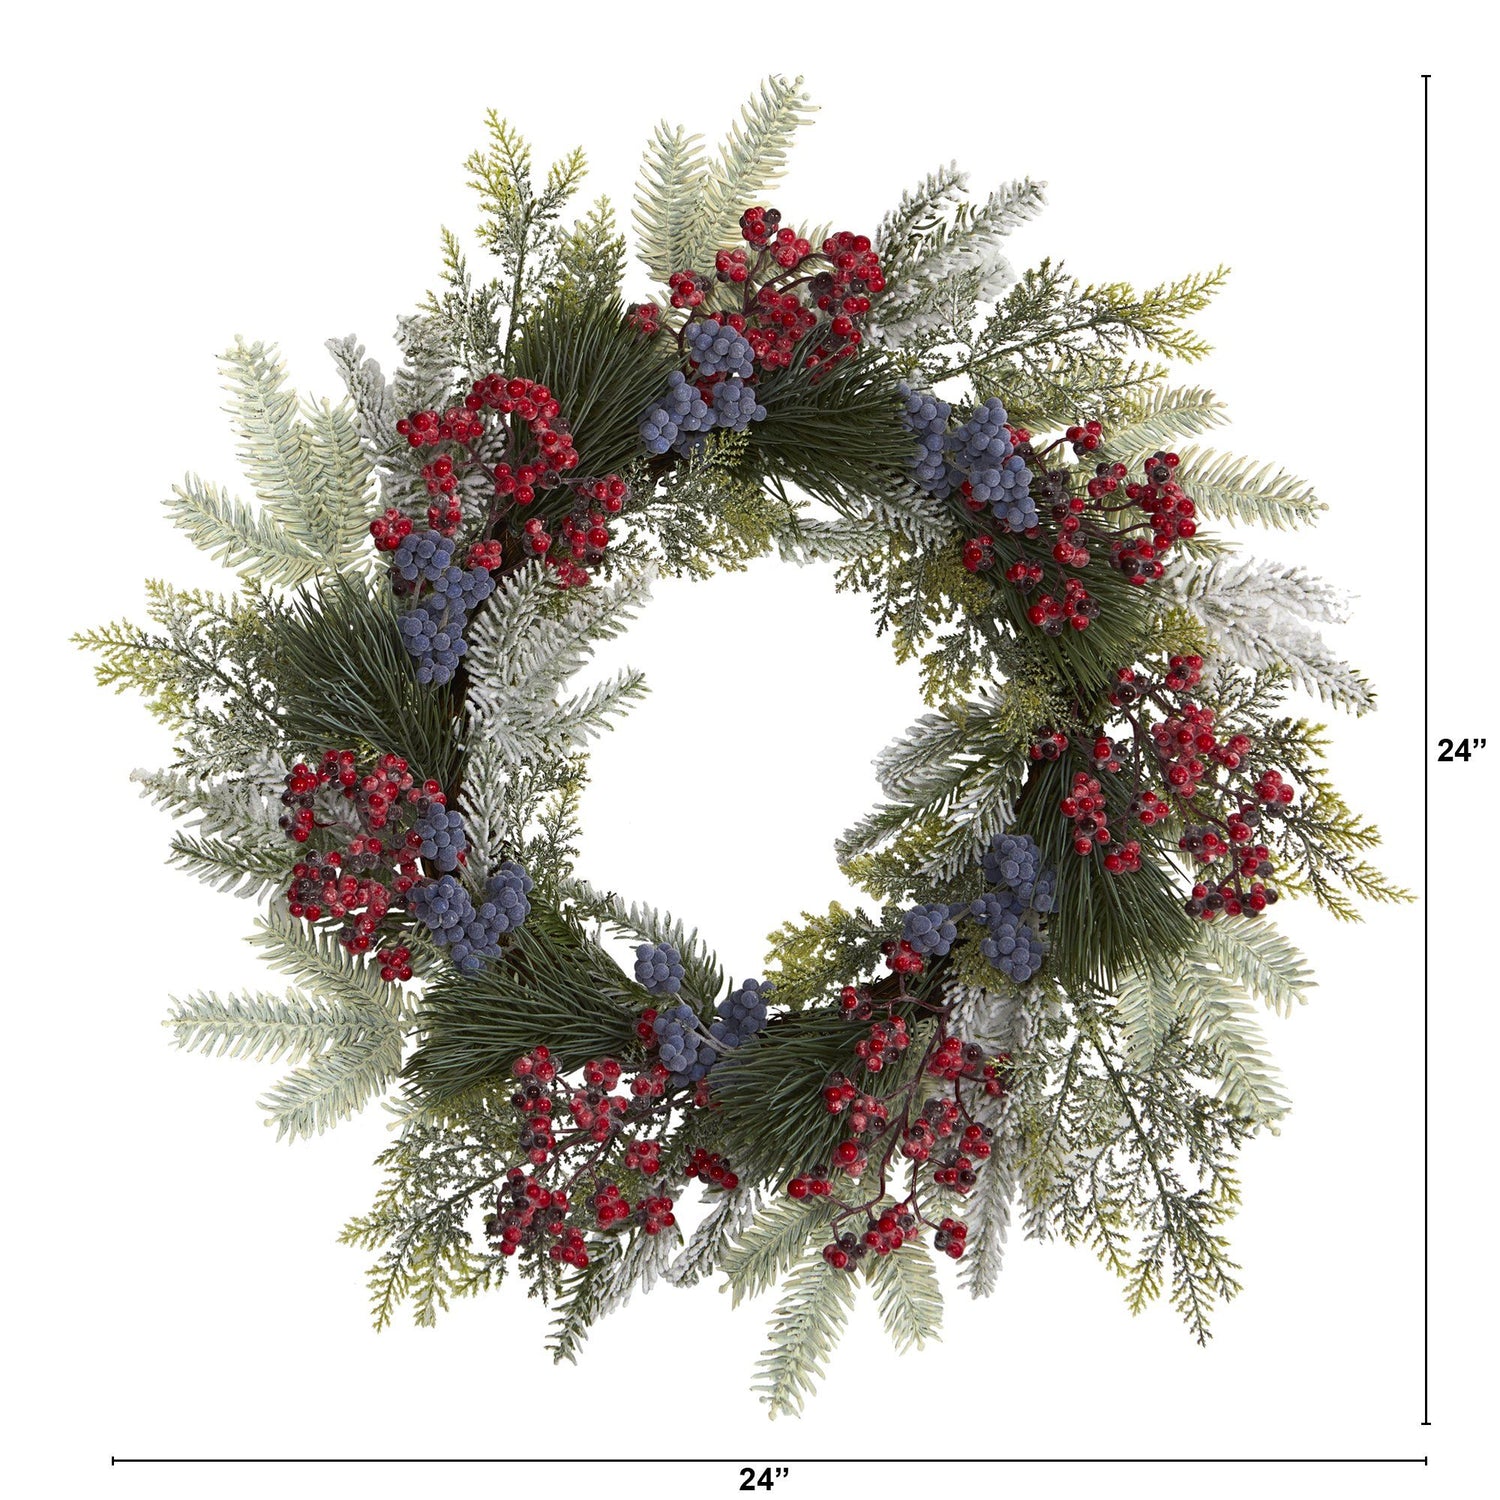 24” Pine and Cedar Artificial Wreath with Berries